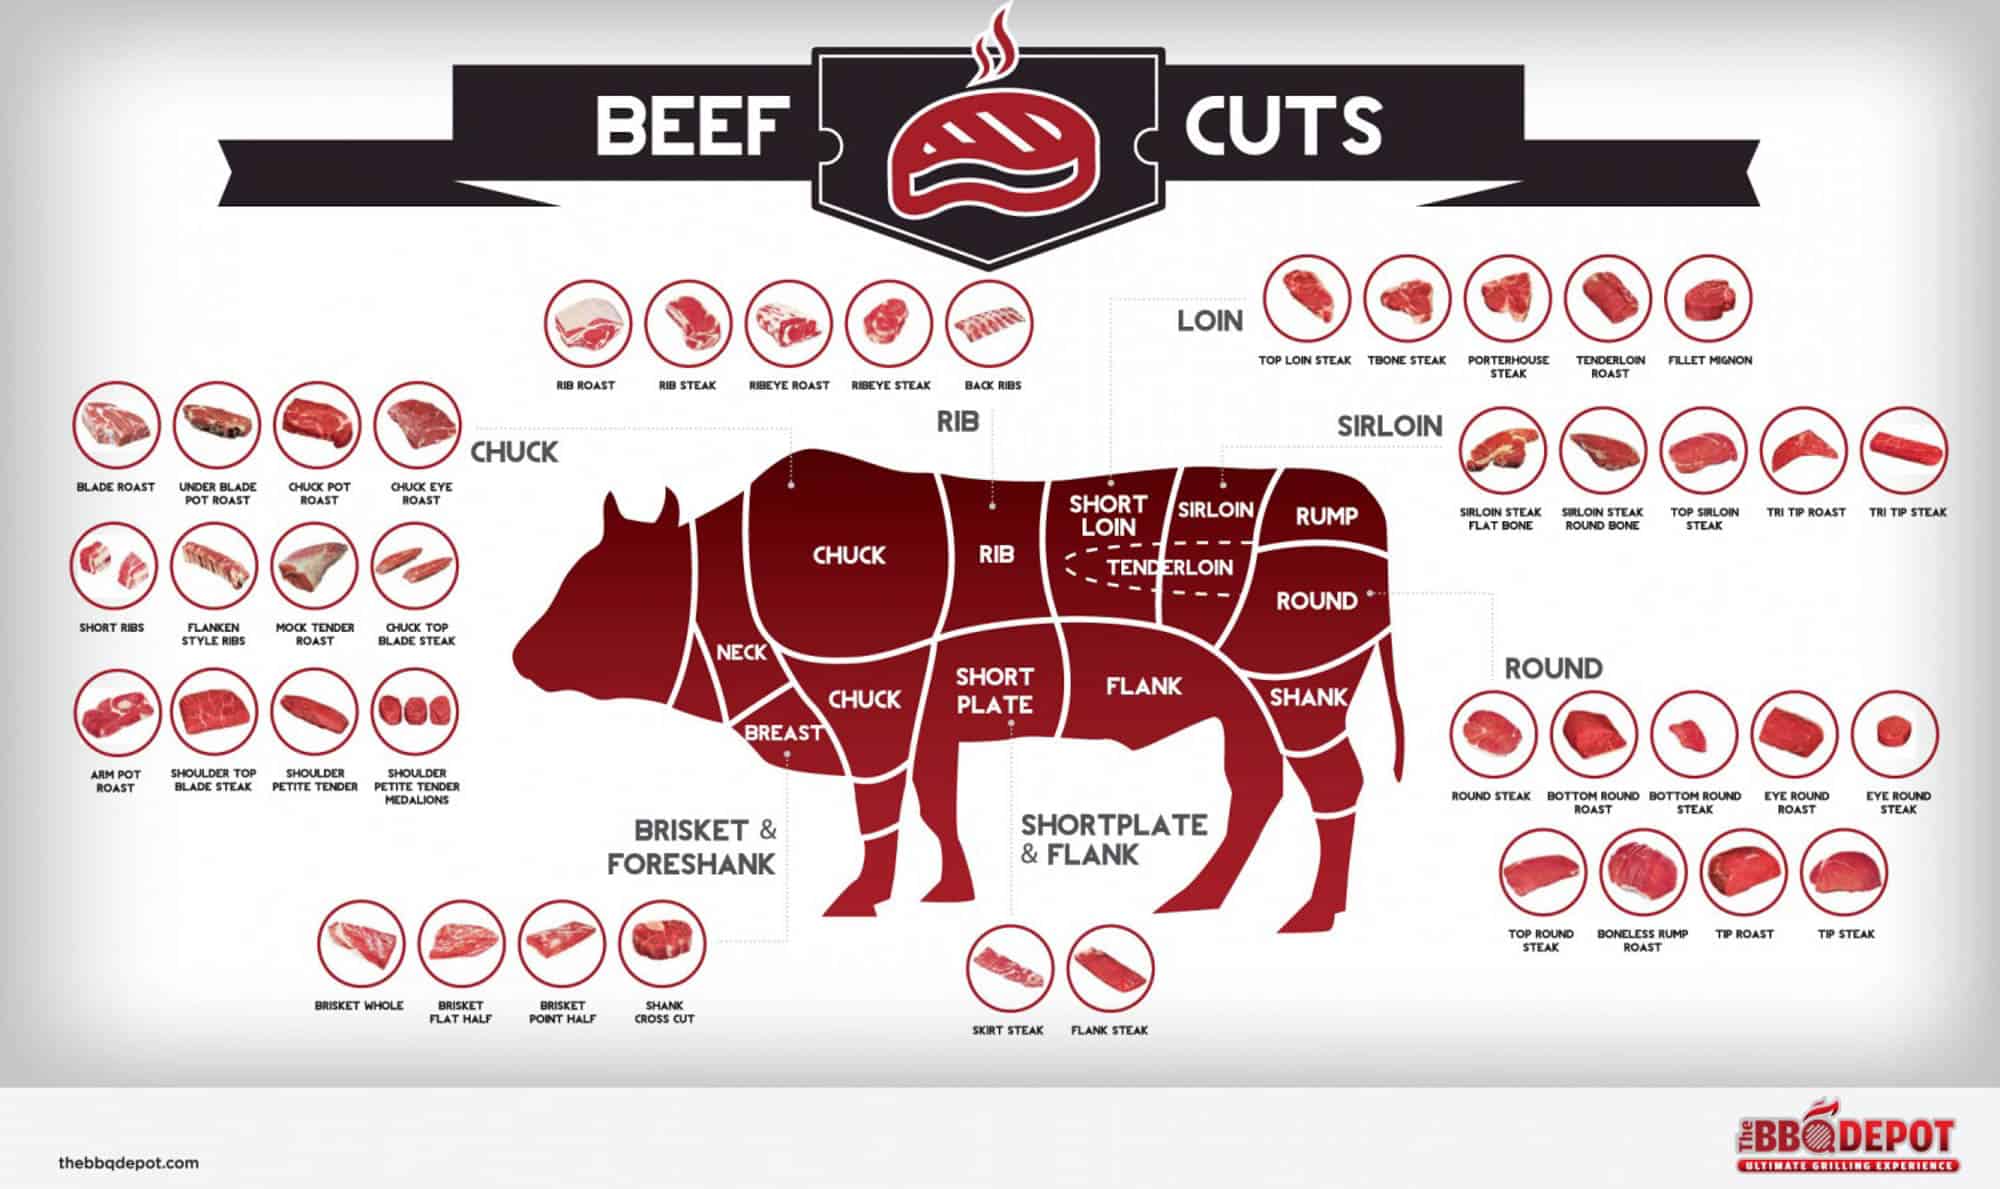 Cuts Of Steak Ranked From Worst To Best - YouTube